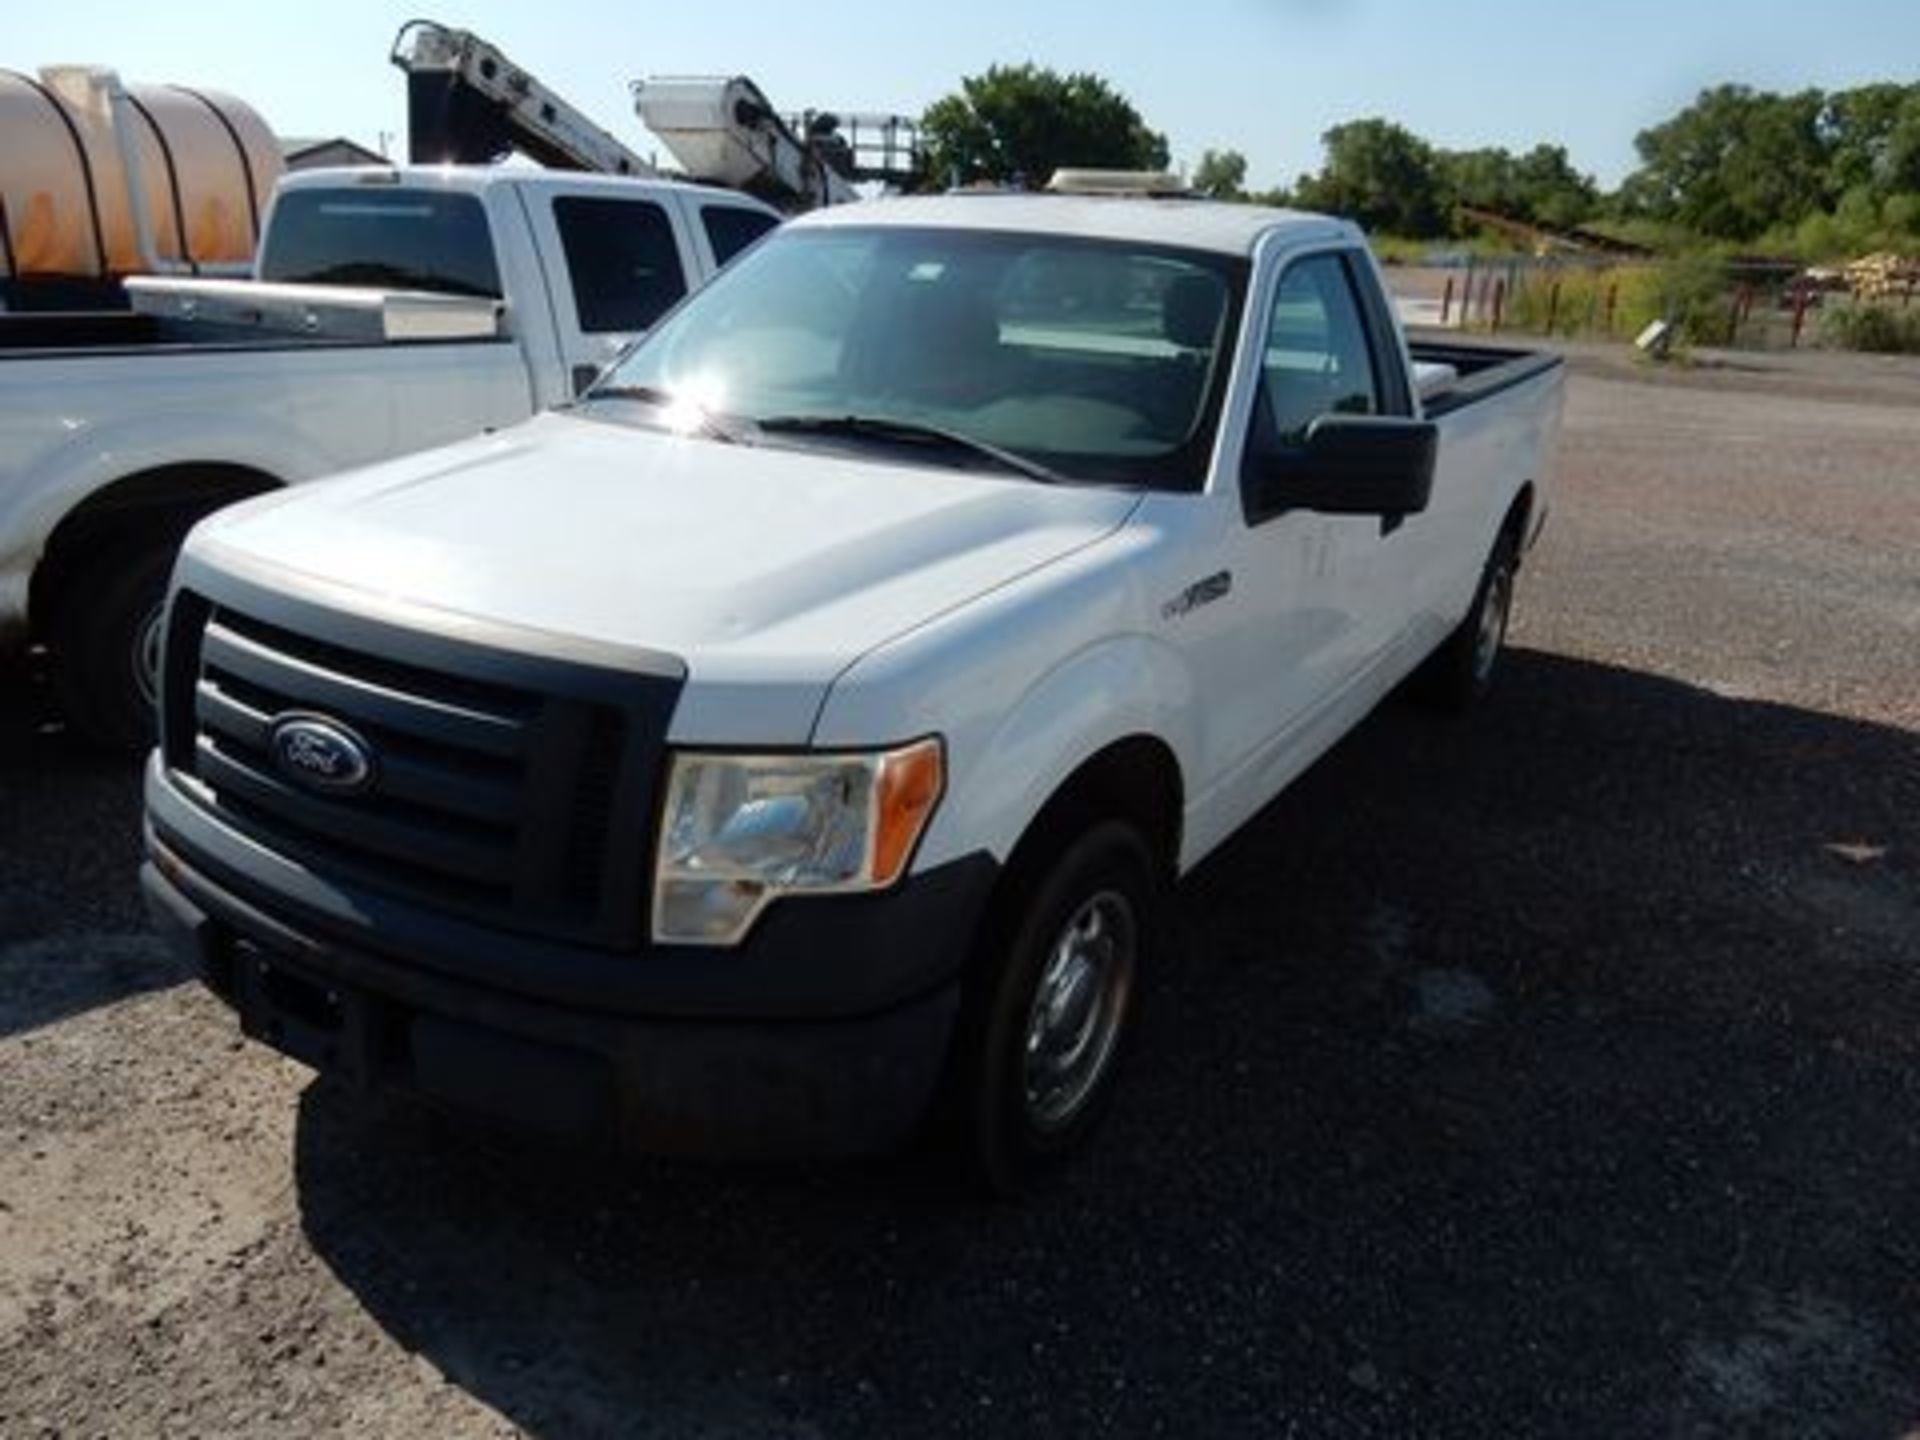 2010 FORD PICKUP, M# F150XL, VIN# 1FTMF1CW4AKC36324, MILEAGE N/A, 2-WHEEL DRIVE, GAS, LONG BED - Image 4 of 6